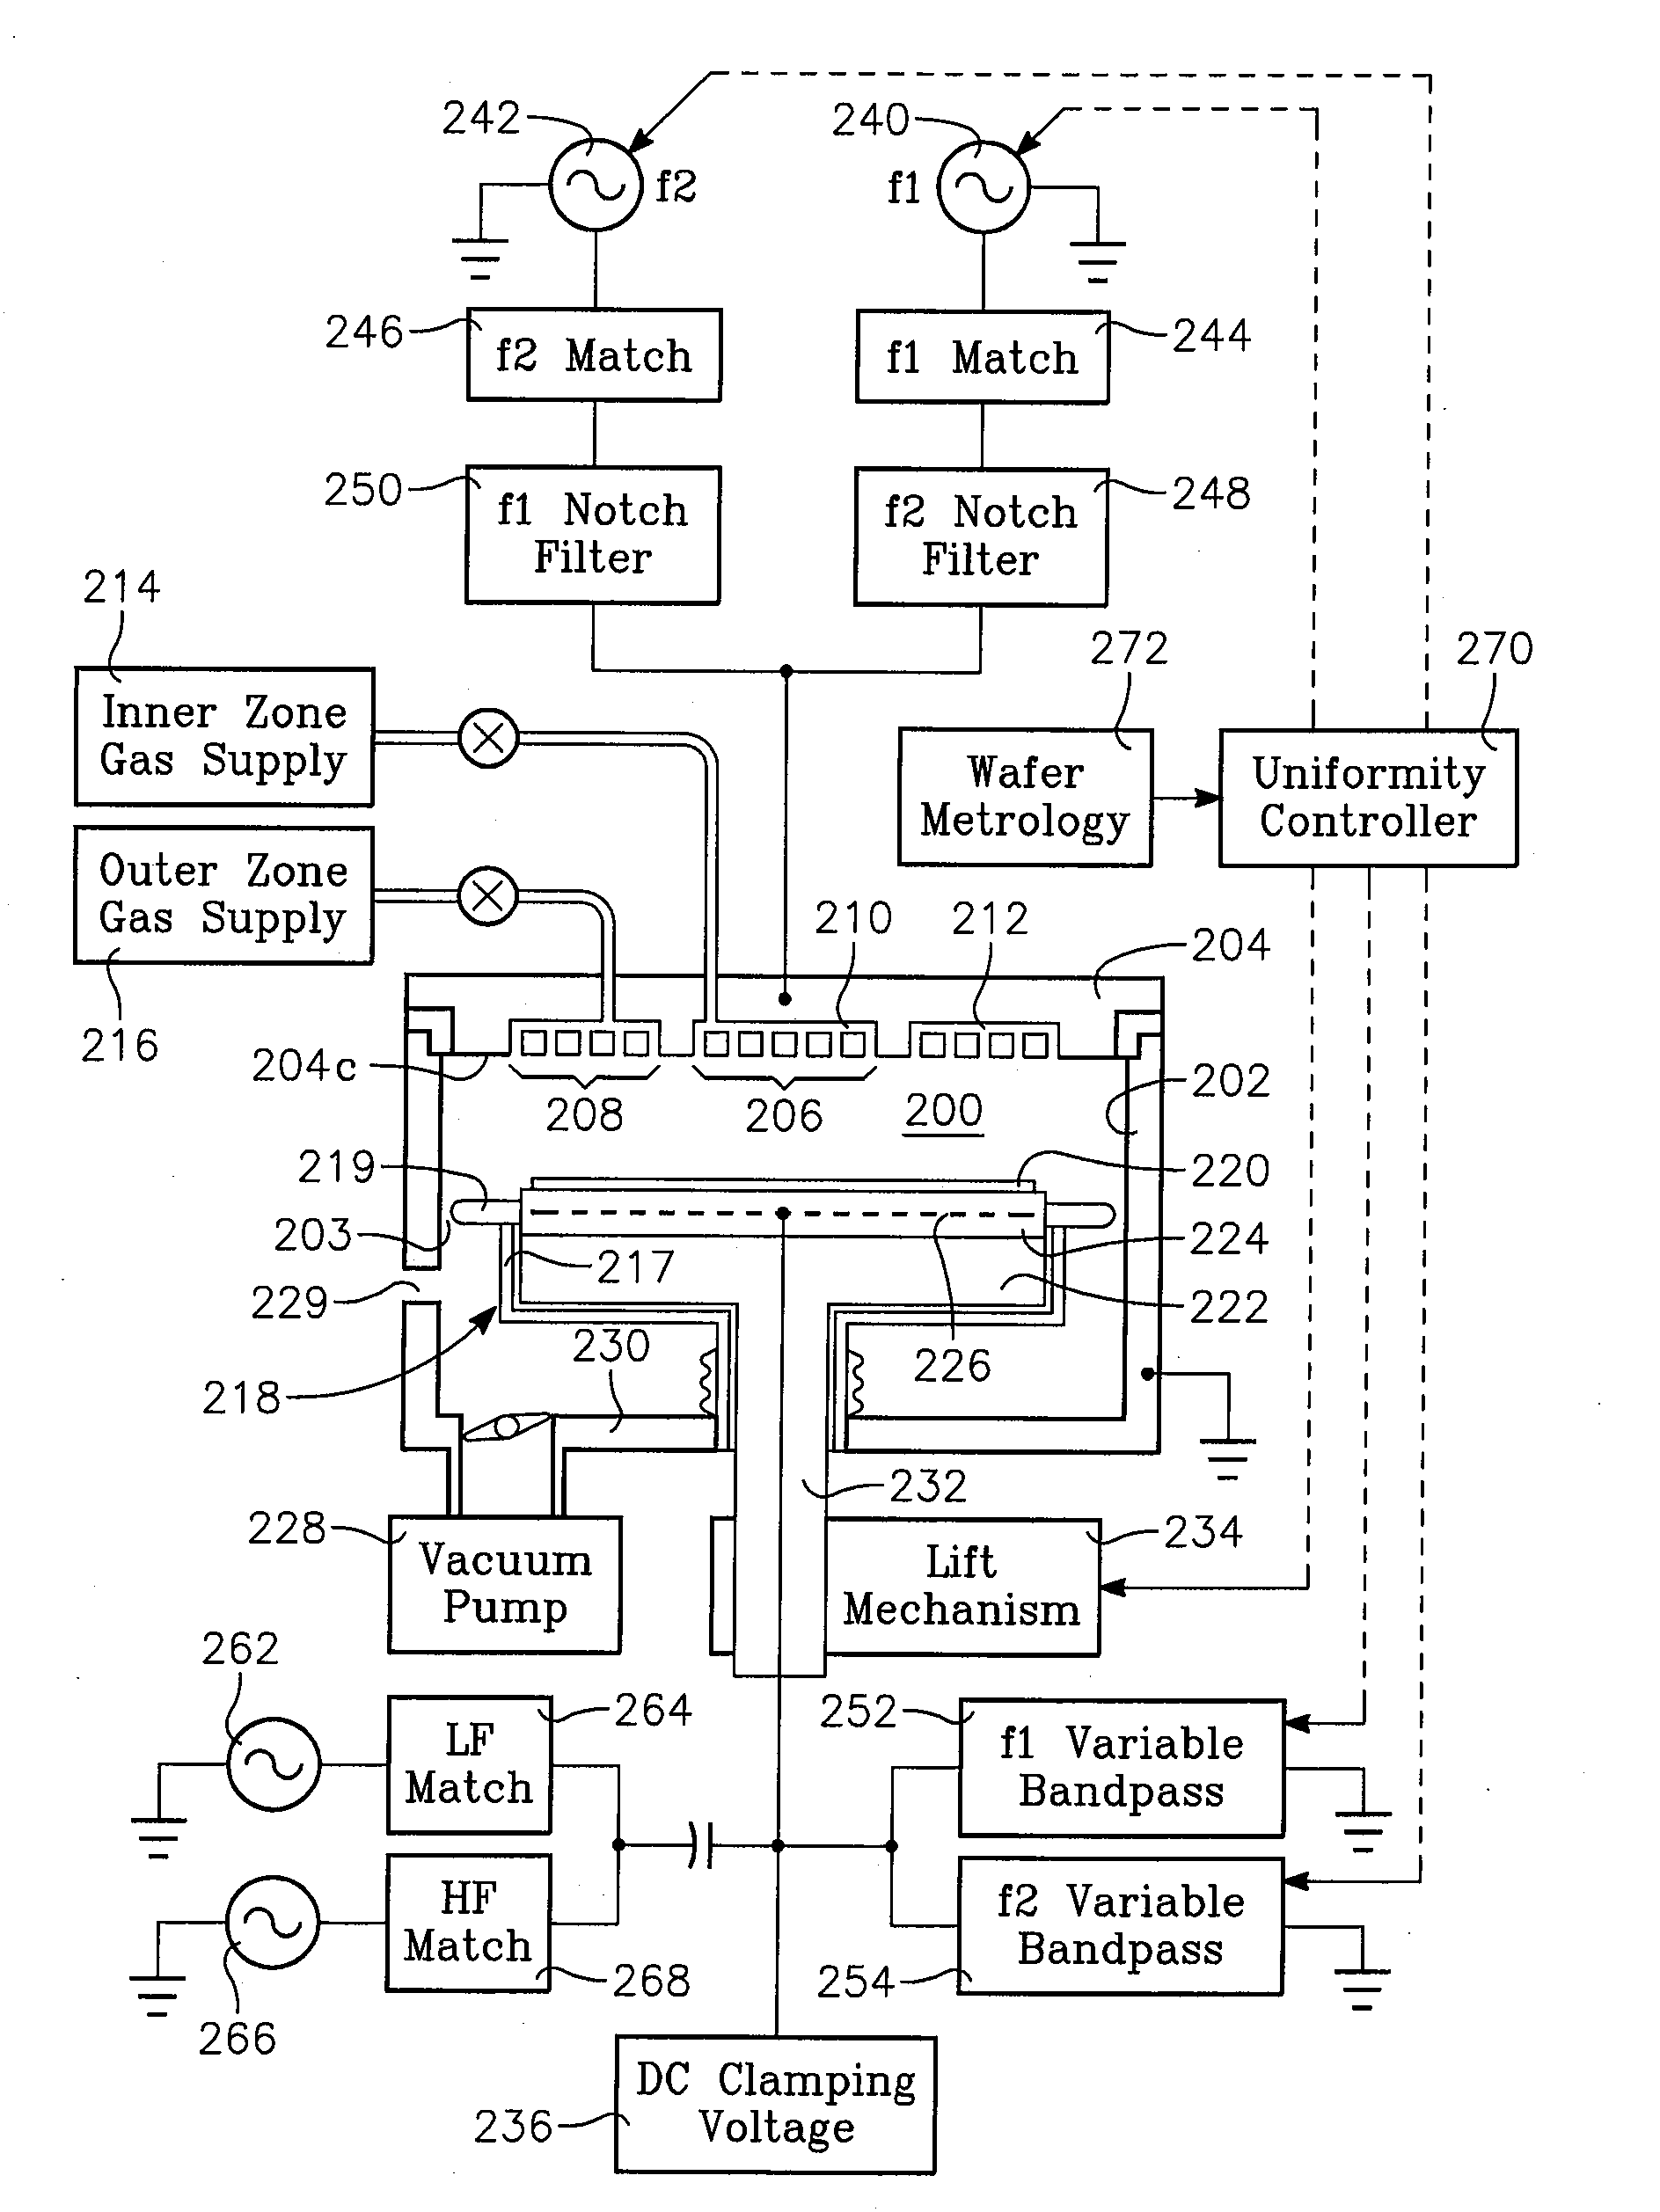 Plasma reactor with ion distribution uniformity controller employing plural vhf sources